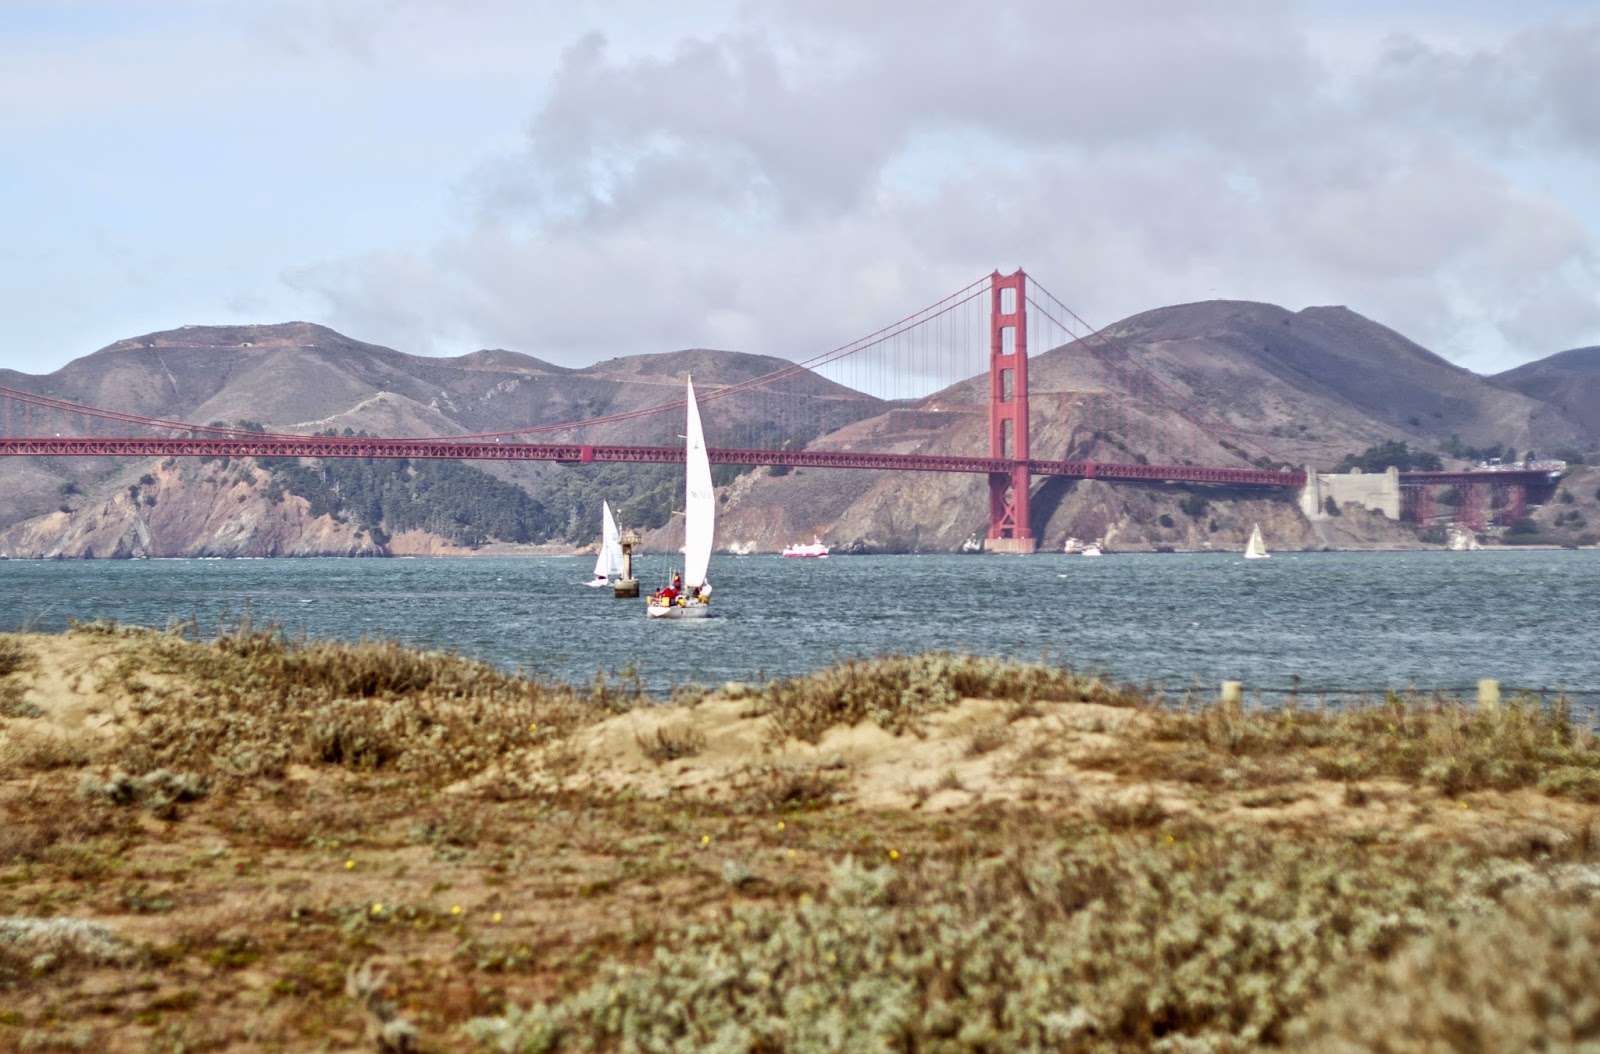 Where to see the Golden Gate Bridge